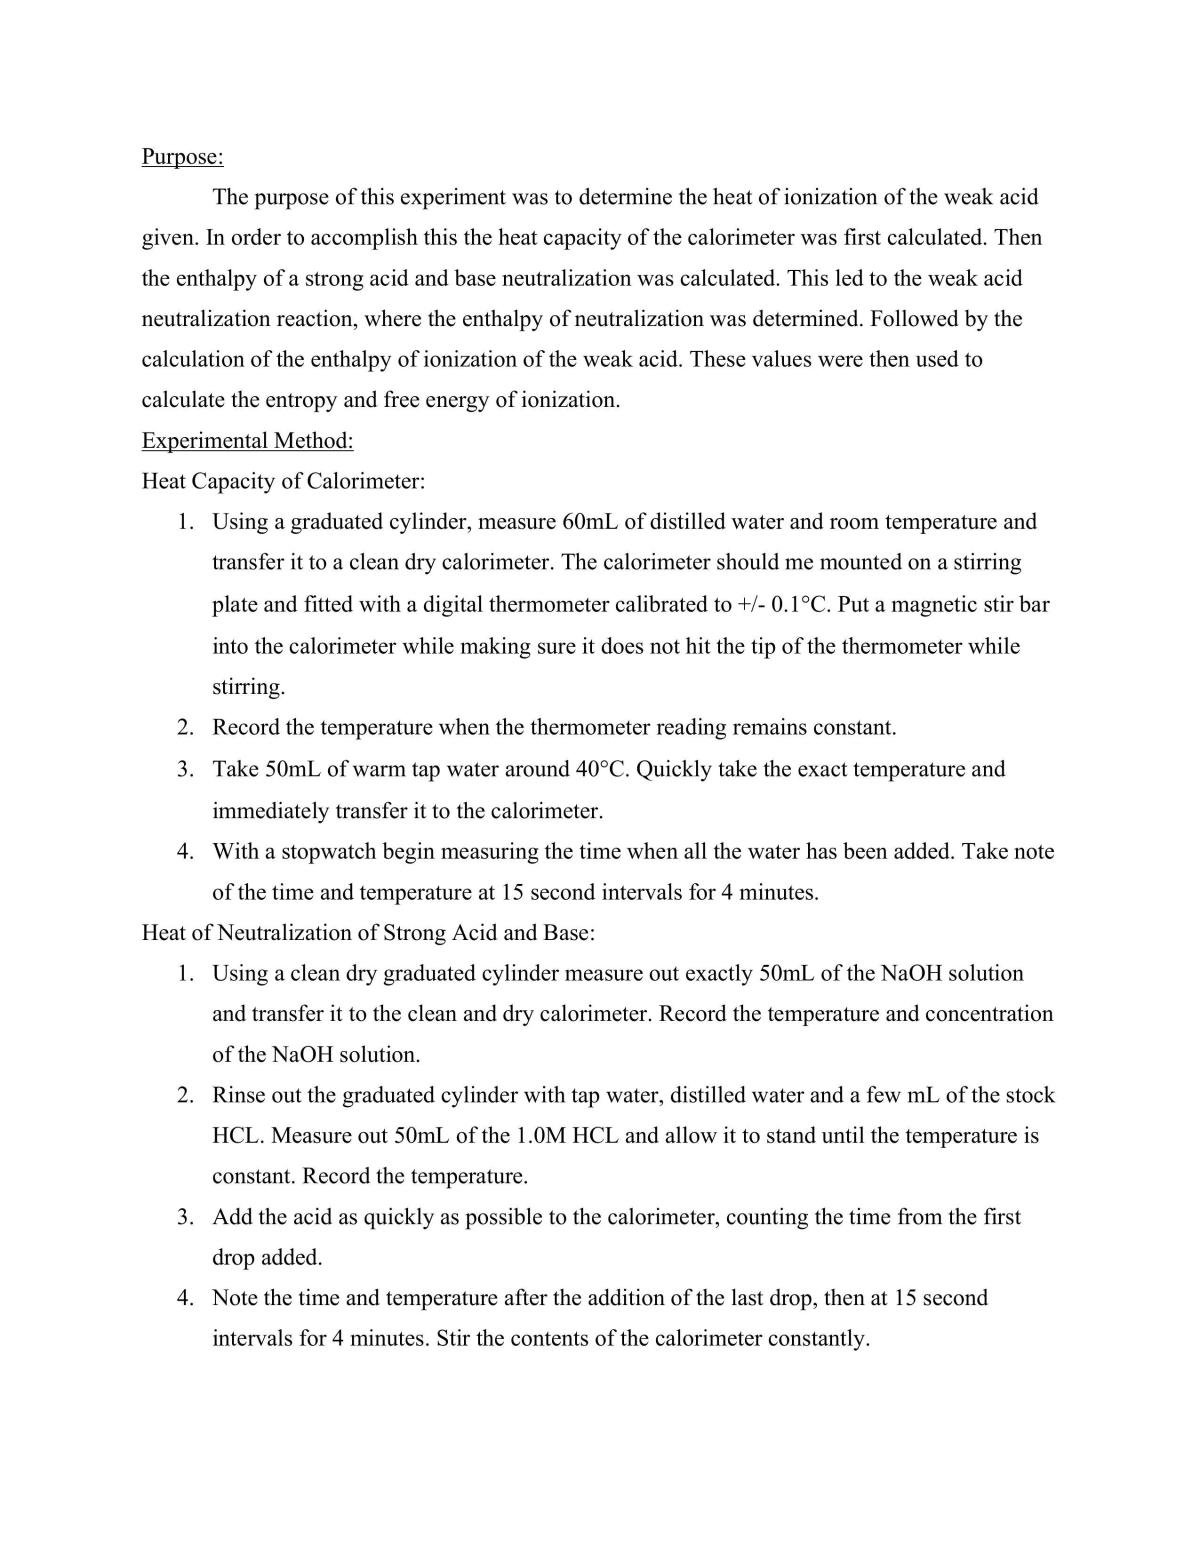 Lab Report 4 - Page 2